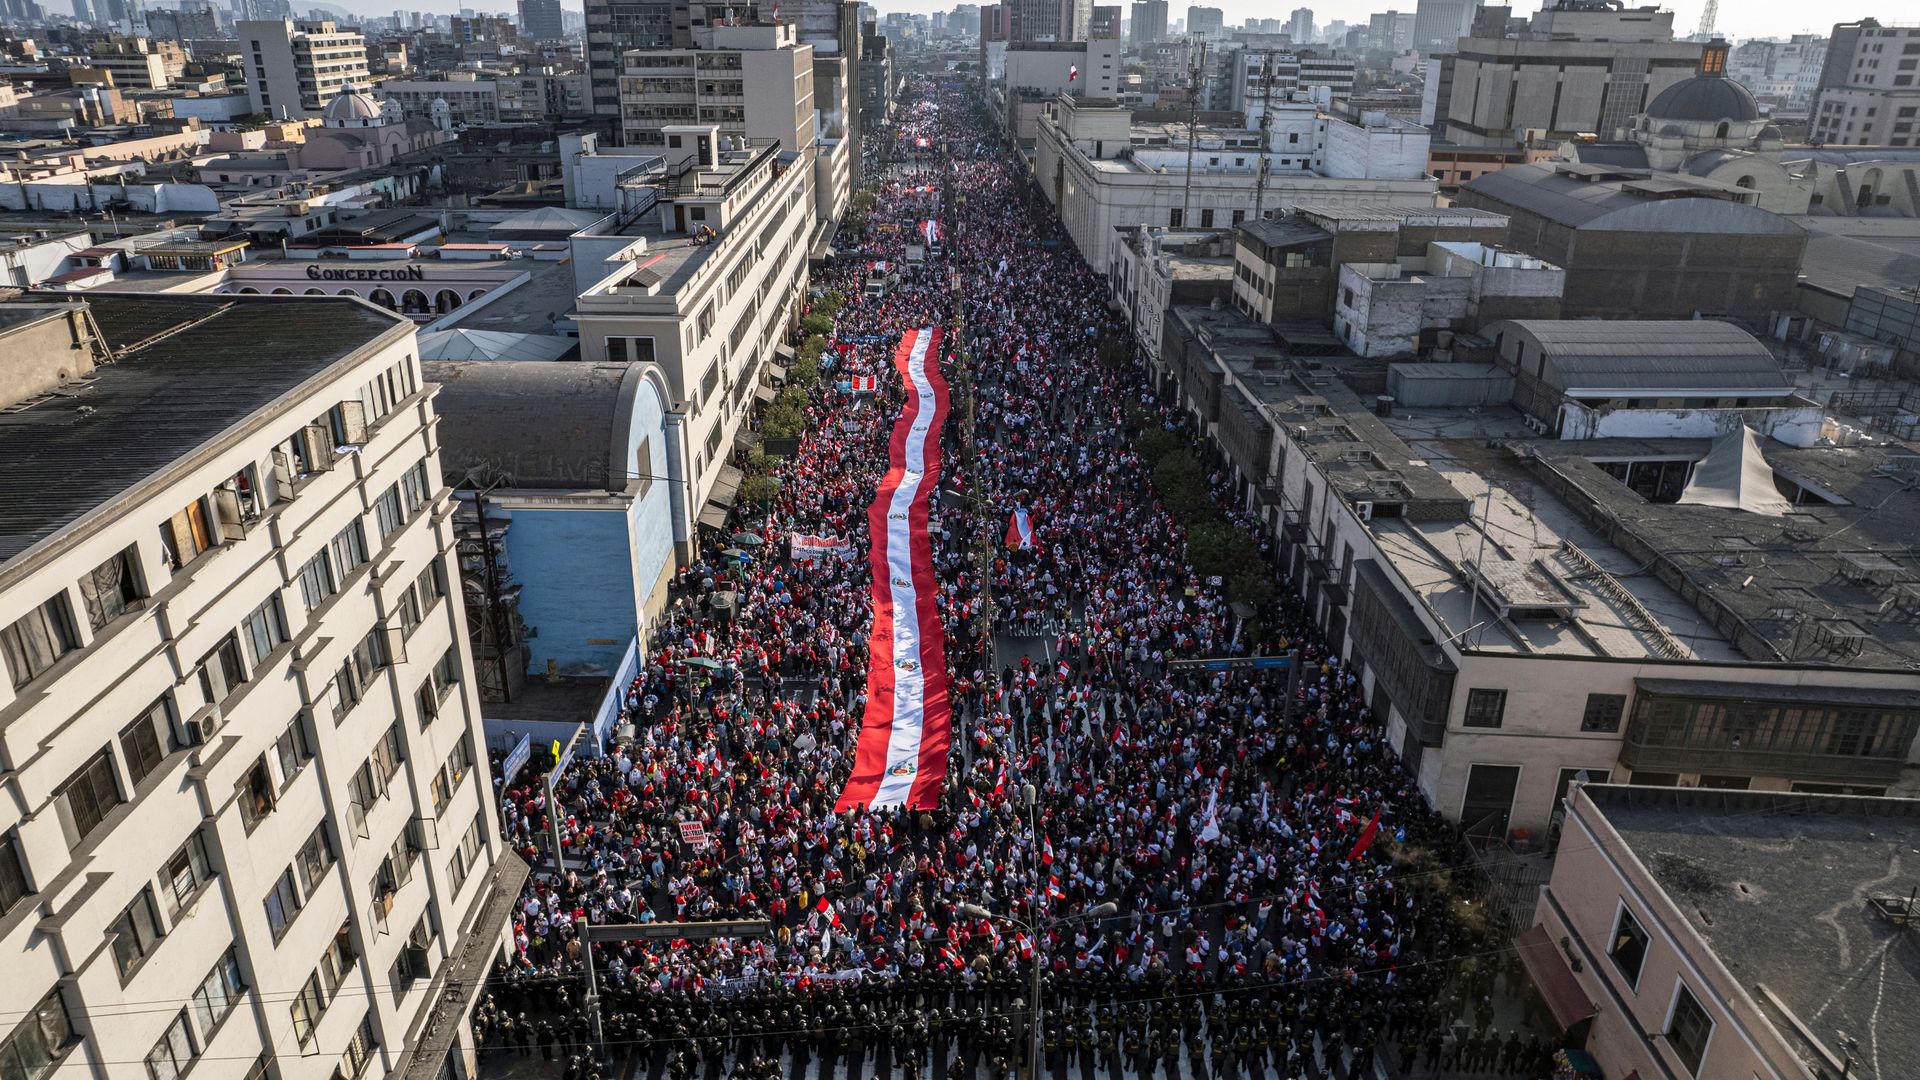 A large crowd of protesters is seen walking through a Peruvian street